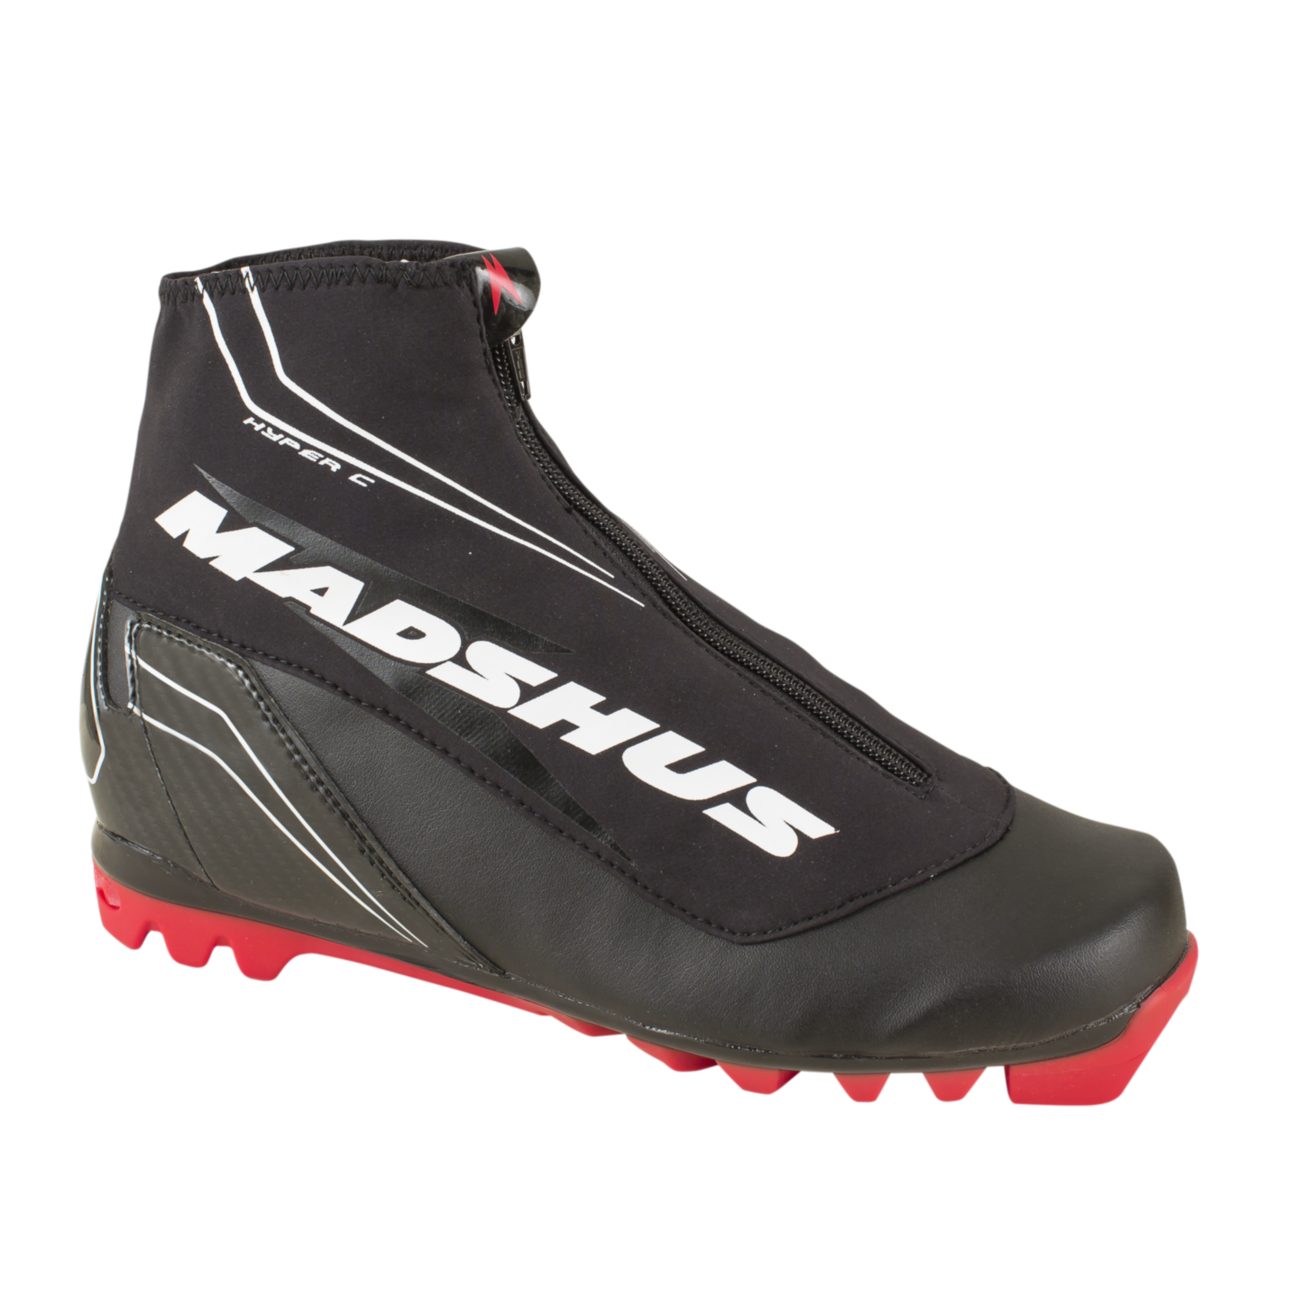 Madshus Hyper C Classic Boot - WebCyclery  WebSkis  Bend, OR